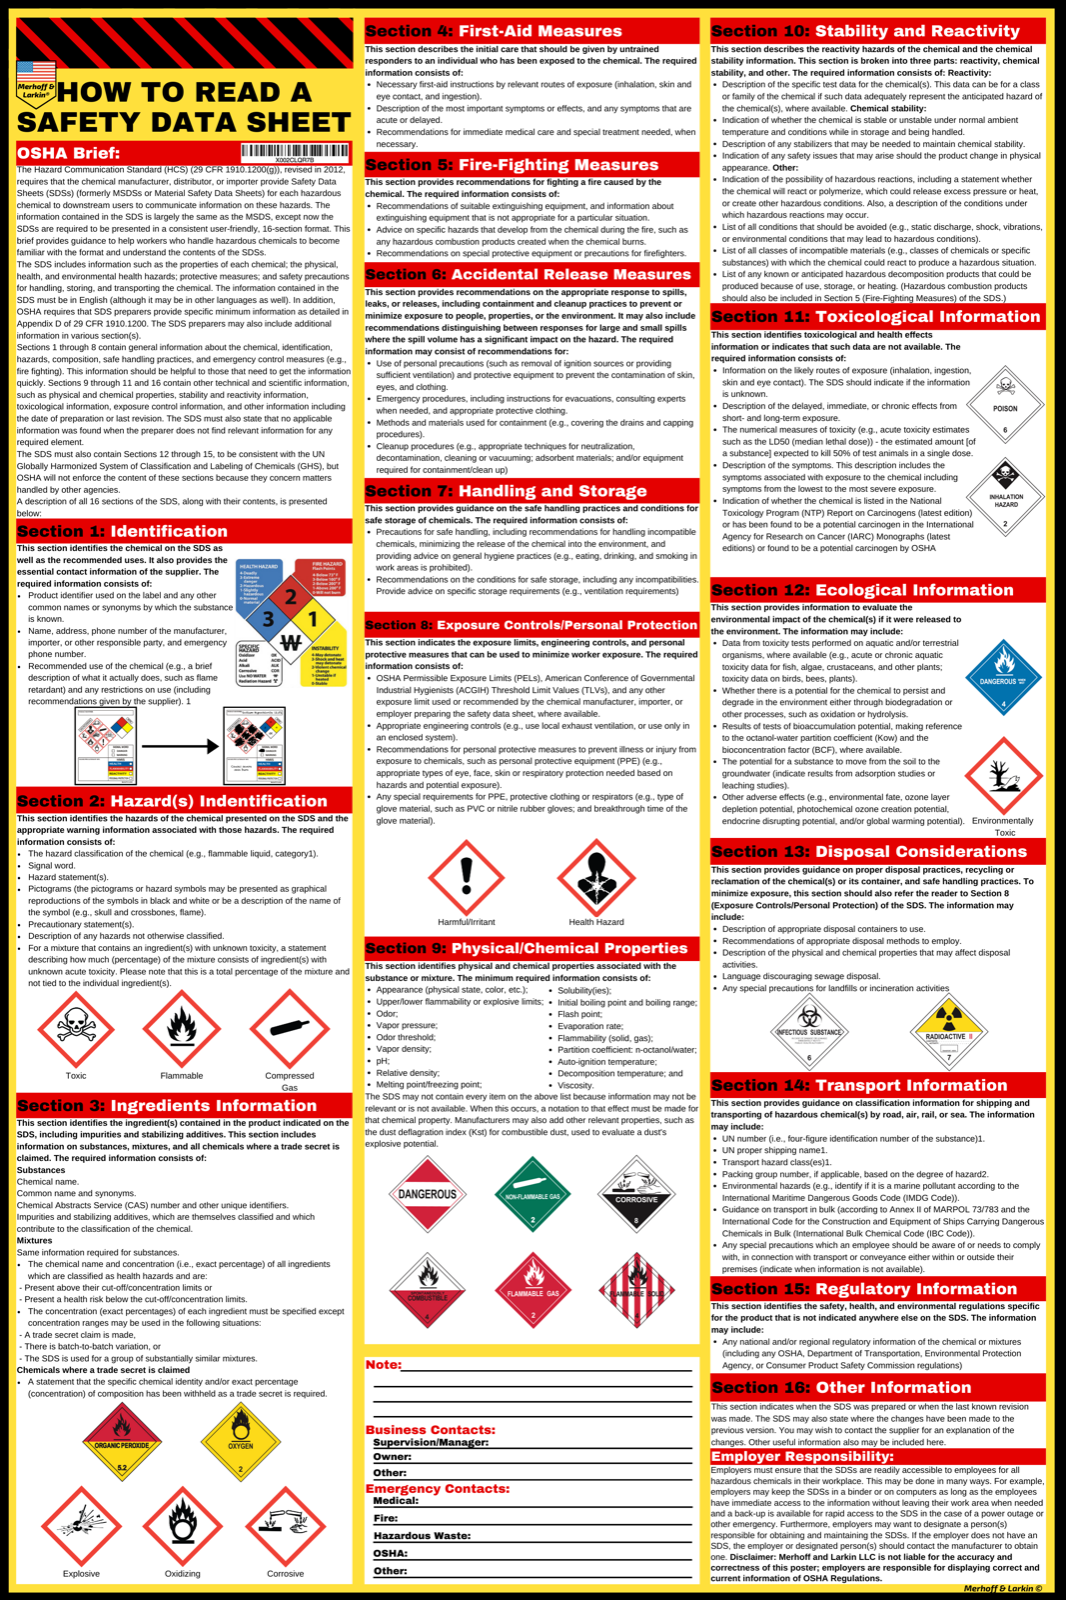 How to Read A Safety Data Sheet (SDS/MSDS) Poster 24x36in OSHA